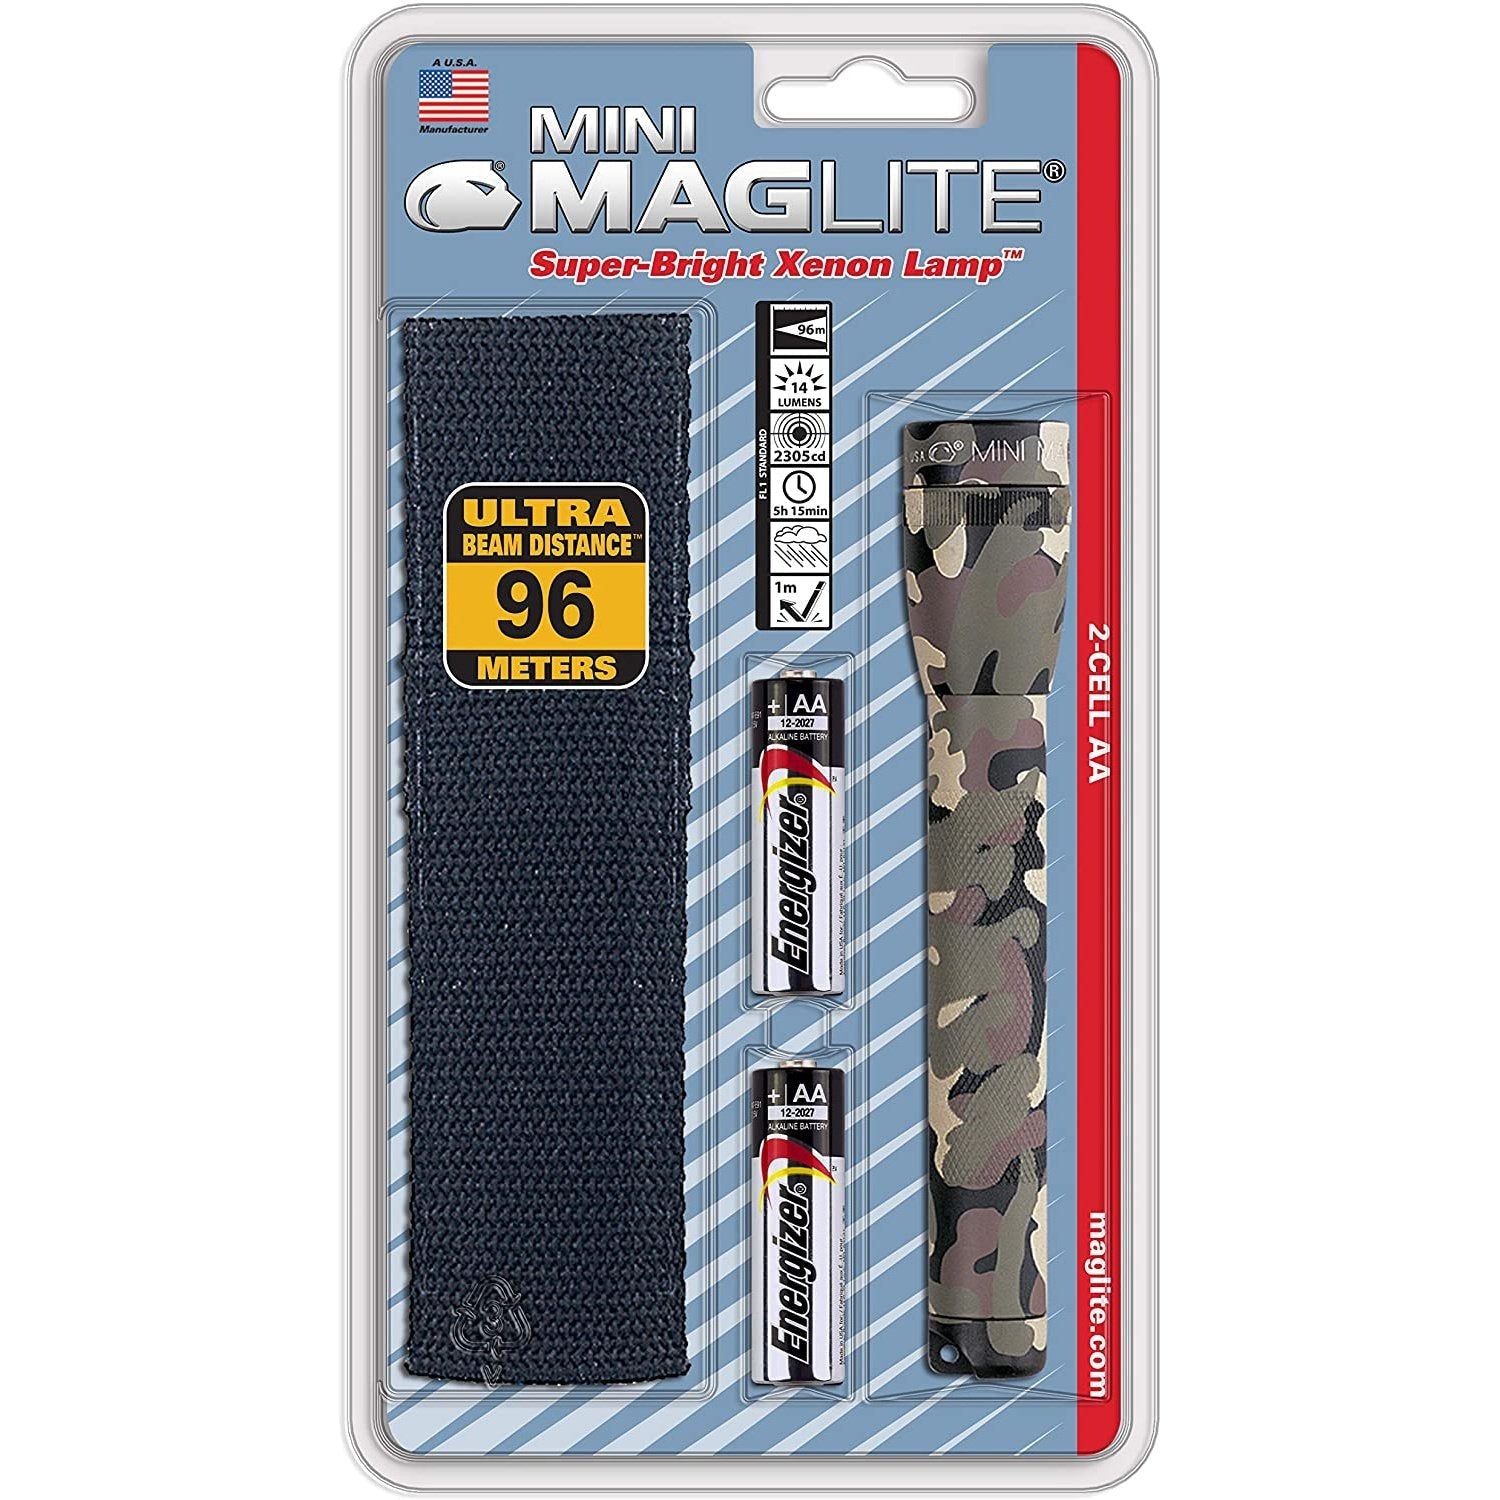 Maglite Mini Incandescent 2-Cell AA Flashlight with Holster, Gray